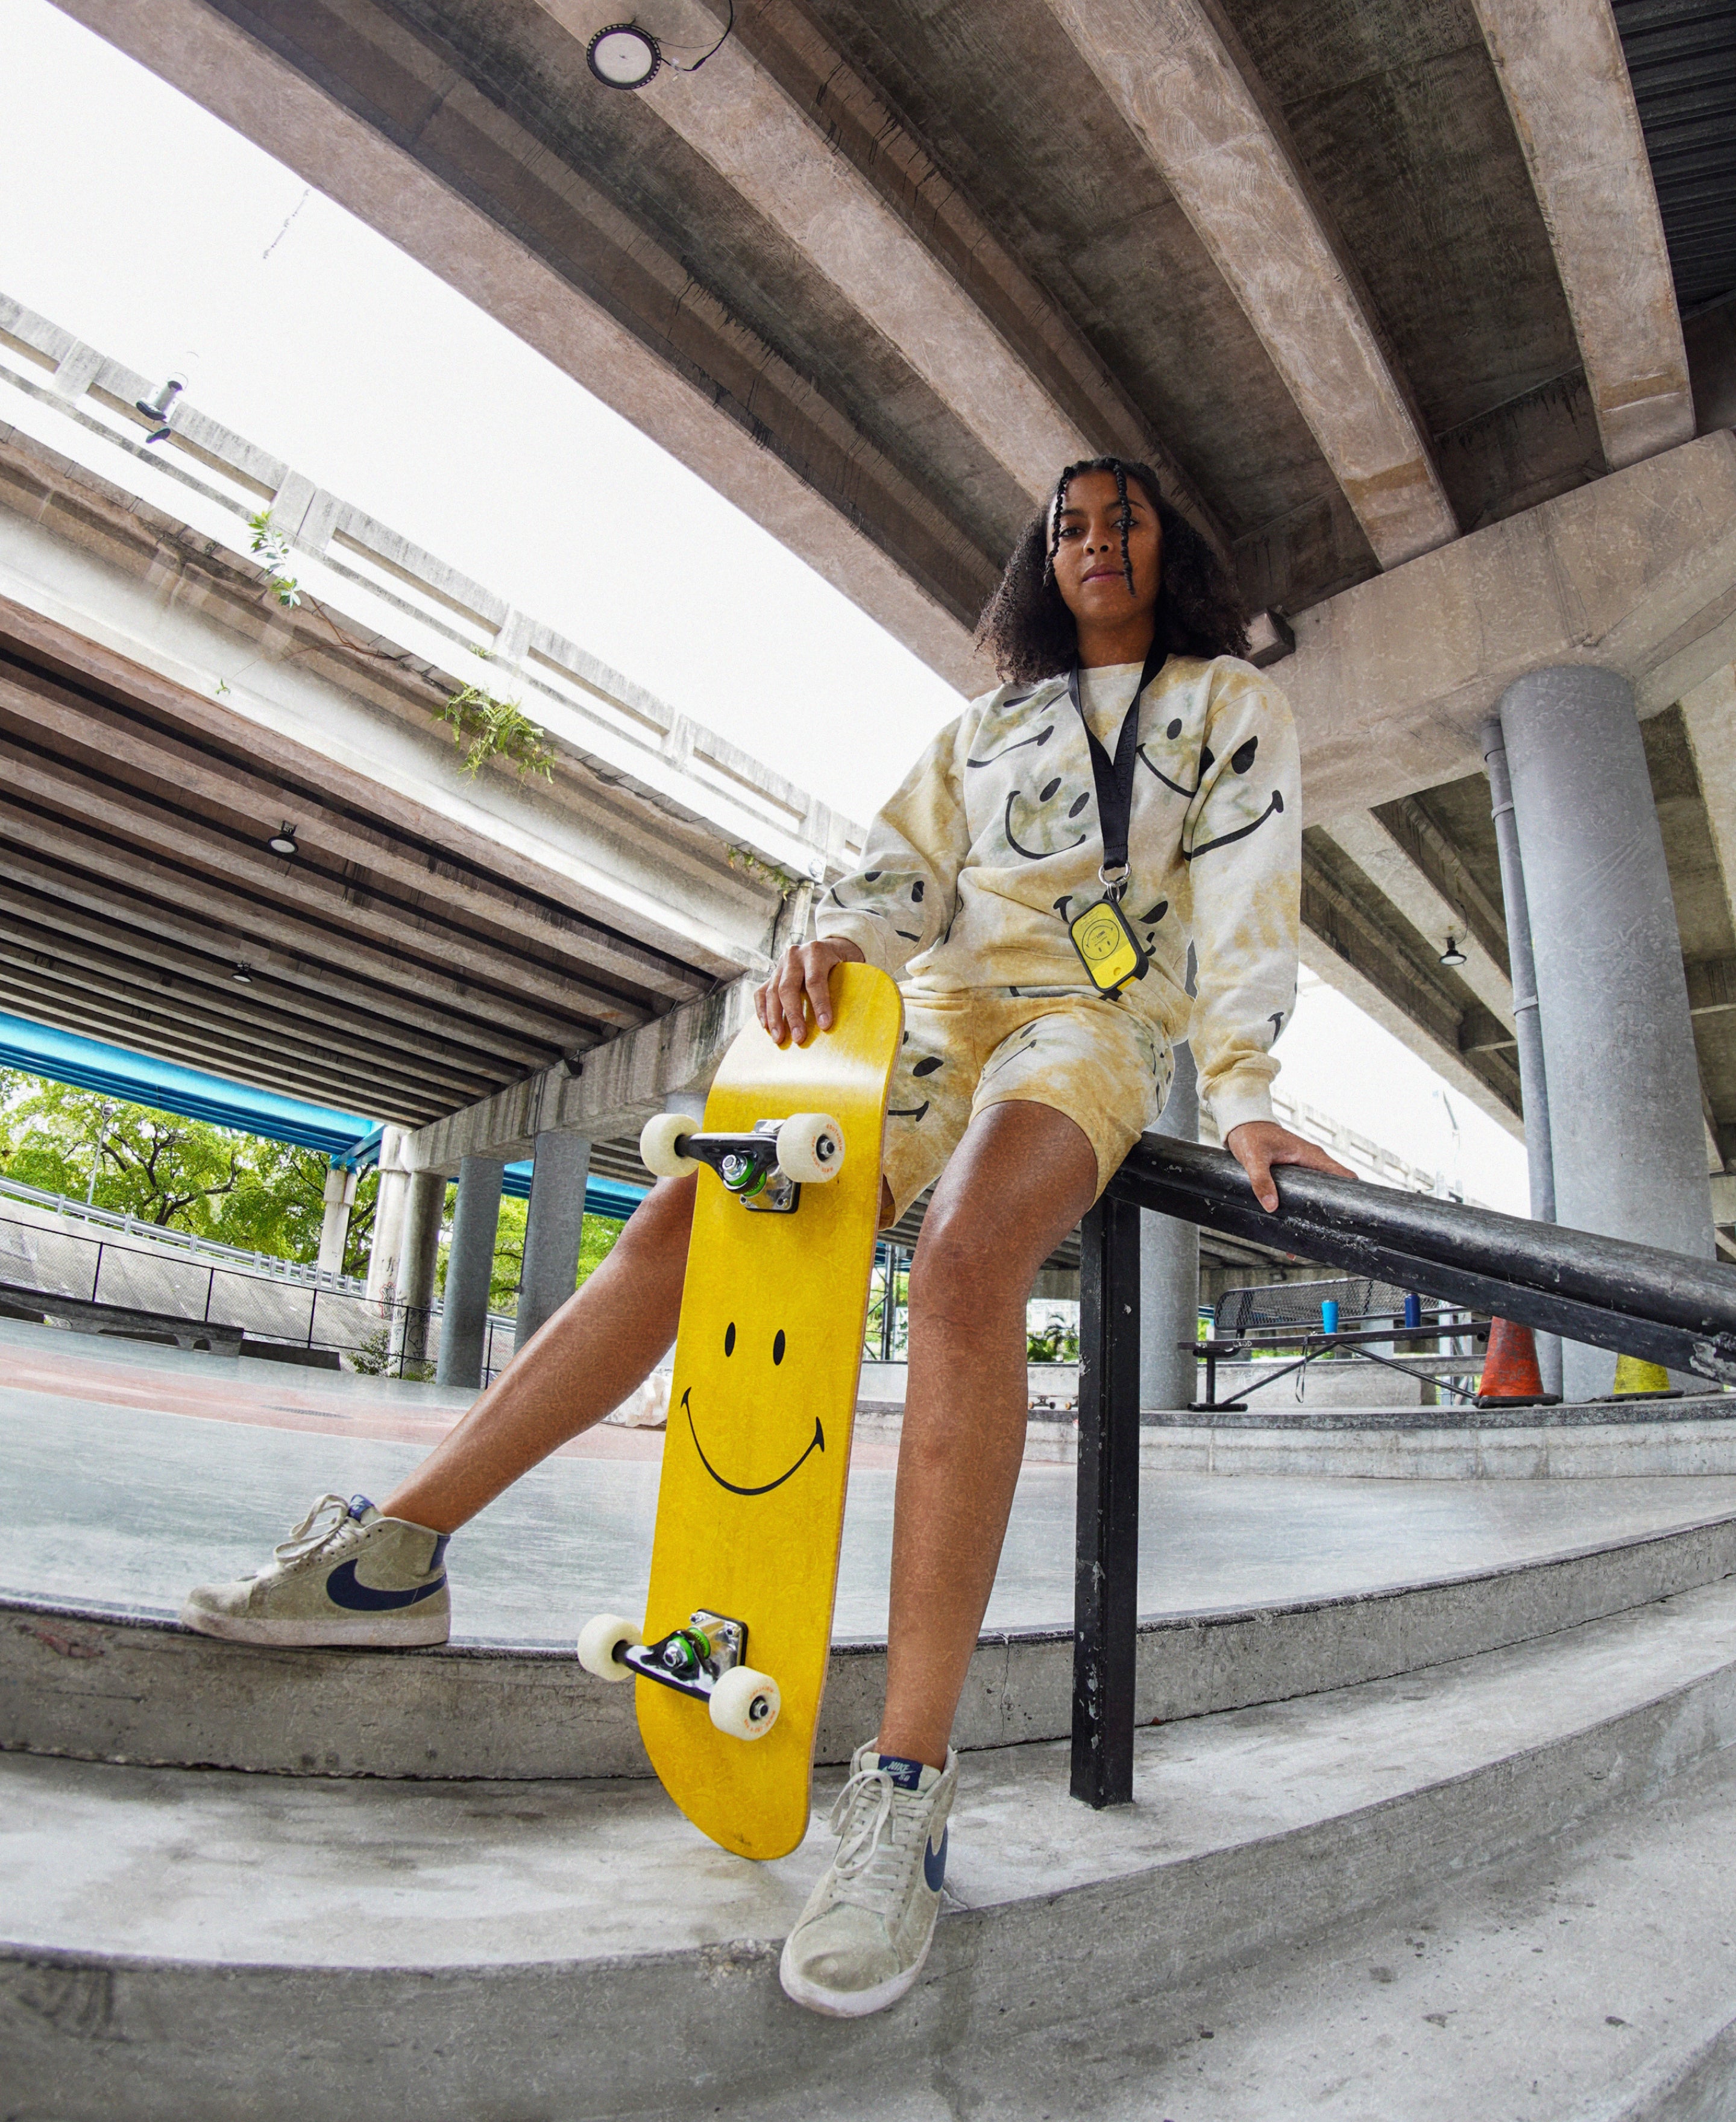 Female model resting on a skatepark rail, holding a yellow Smiley skateboard with a Touchland Black Lanyard with a Power mist hanging